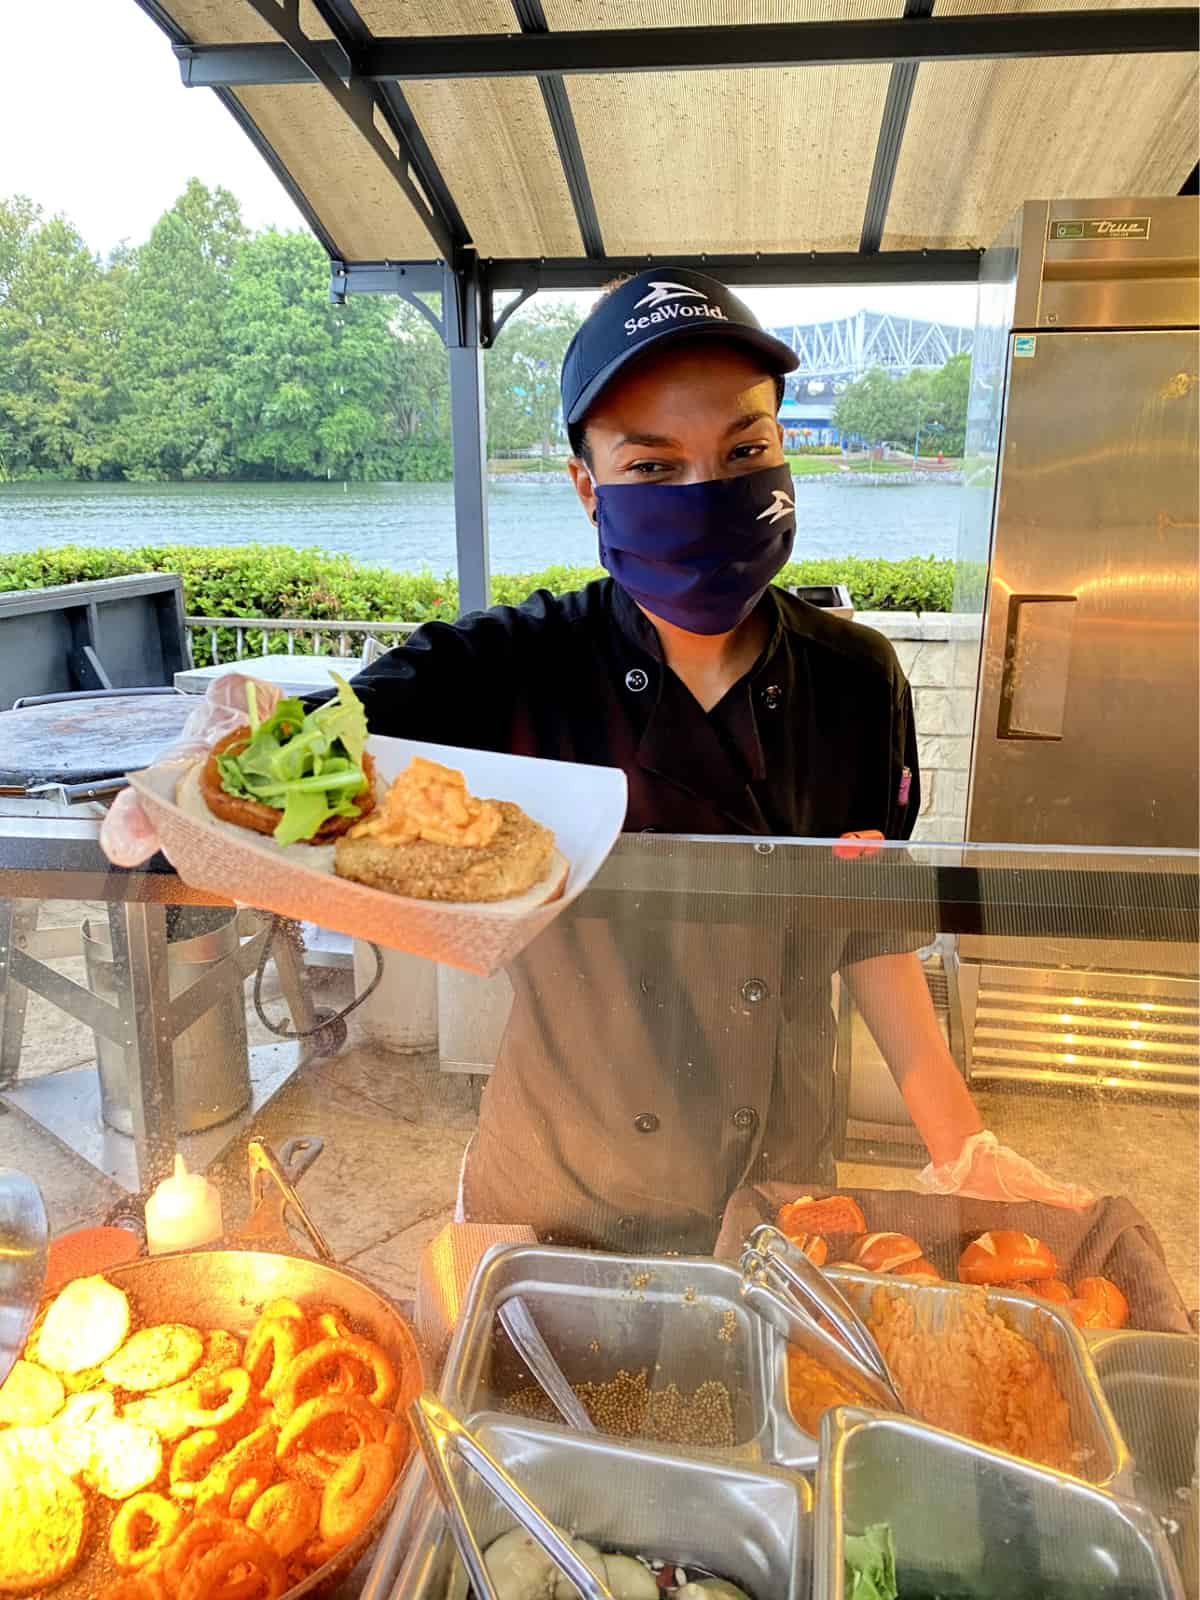 SeaWorld Orlando employee wearing mask, hat, and gloves handing a fried green tomato slider over counter.